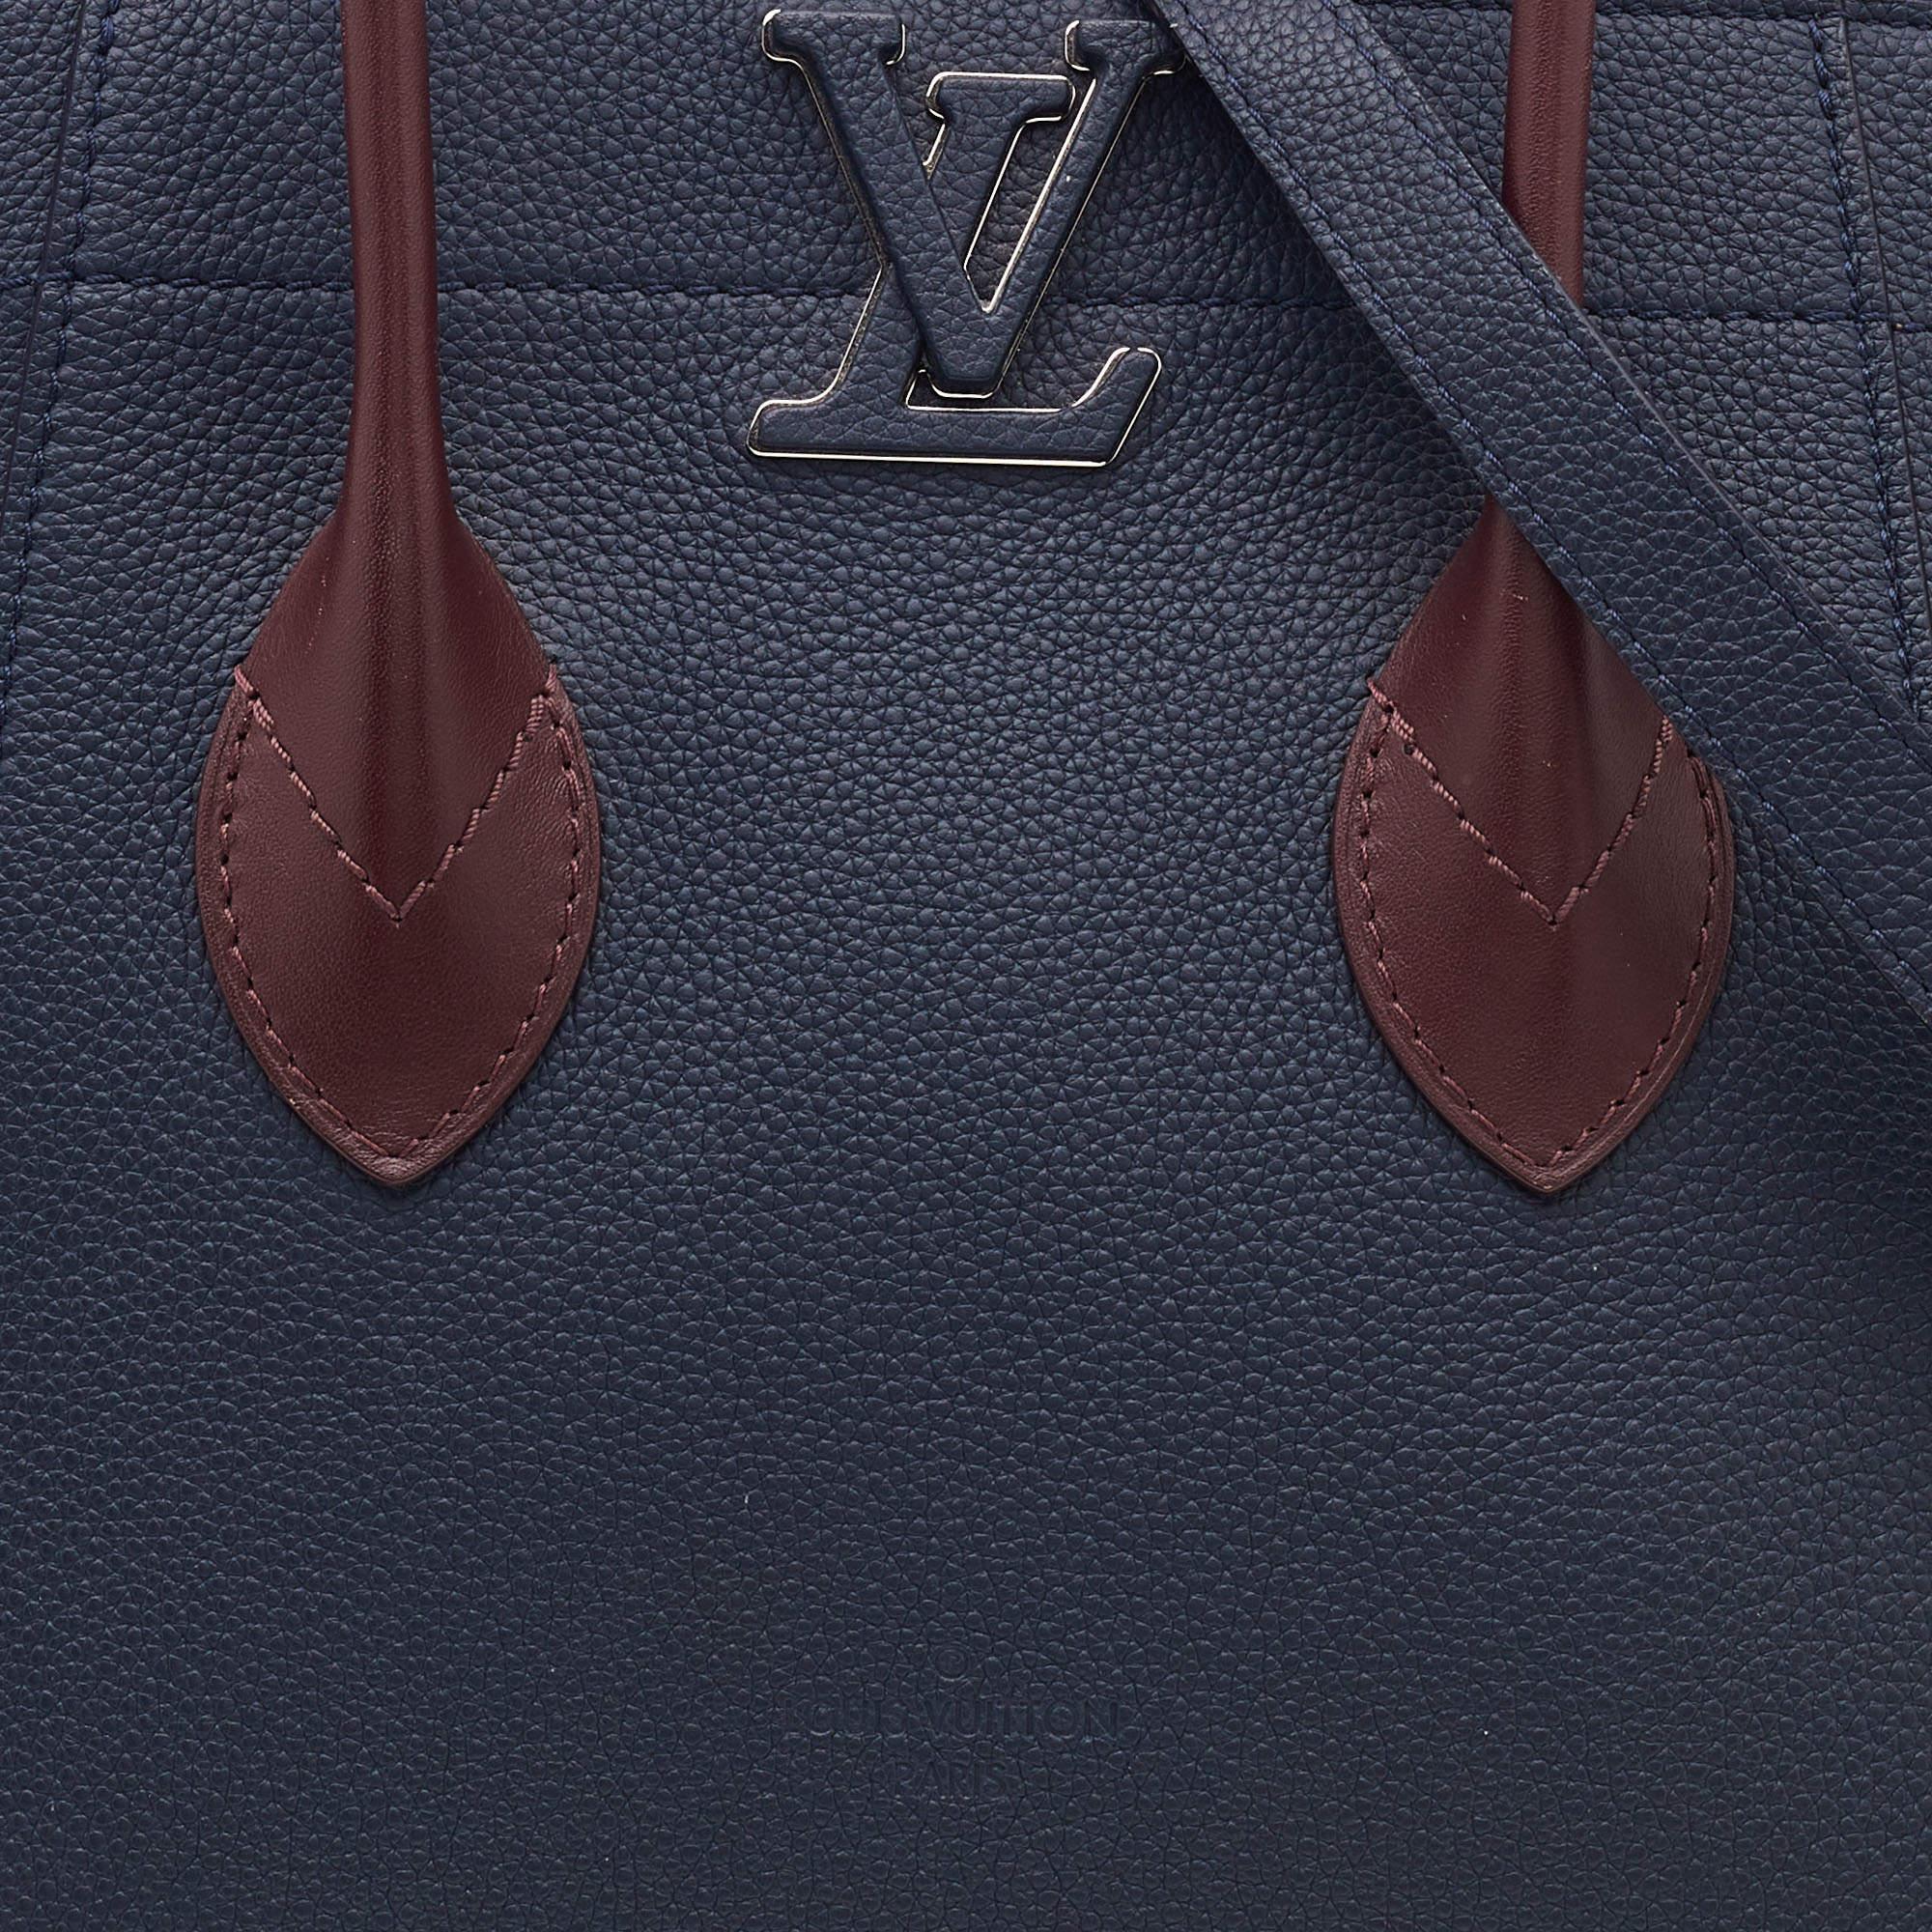 Louis Vuitton Navy Blue/Burgundy Leather Freedom Bag 4